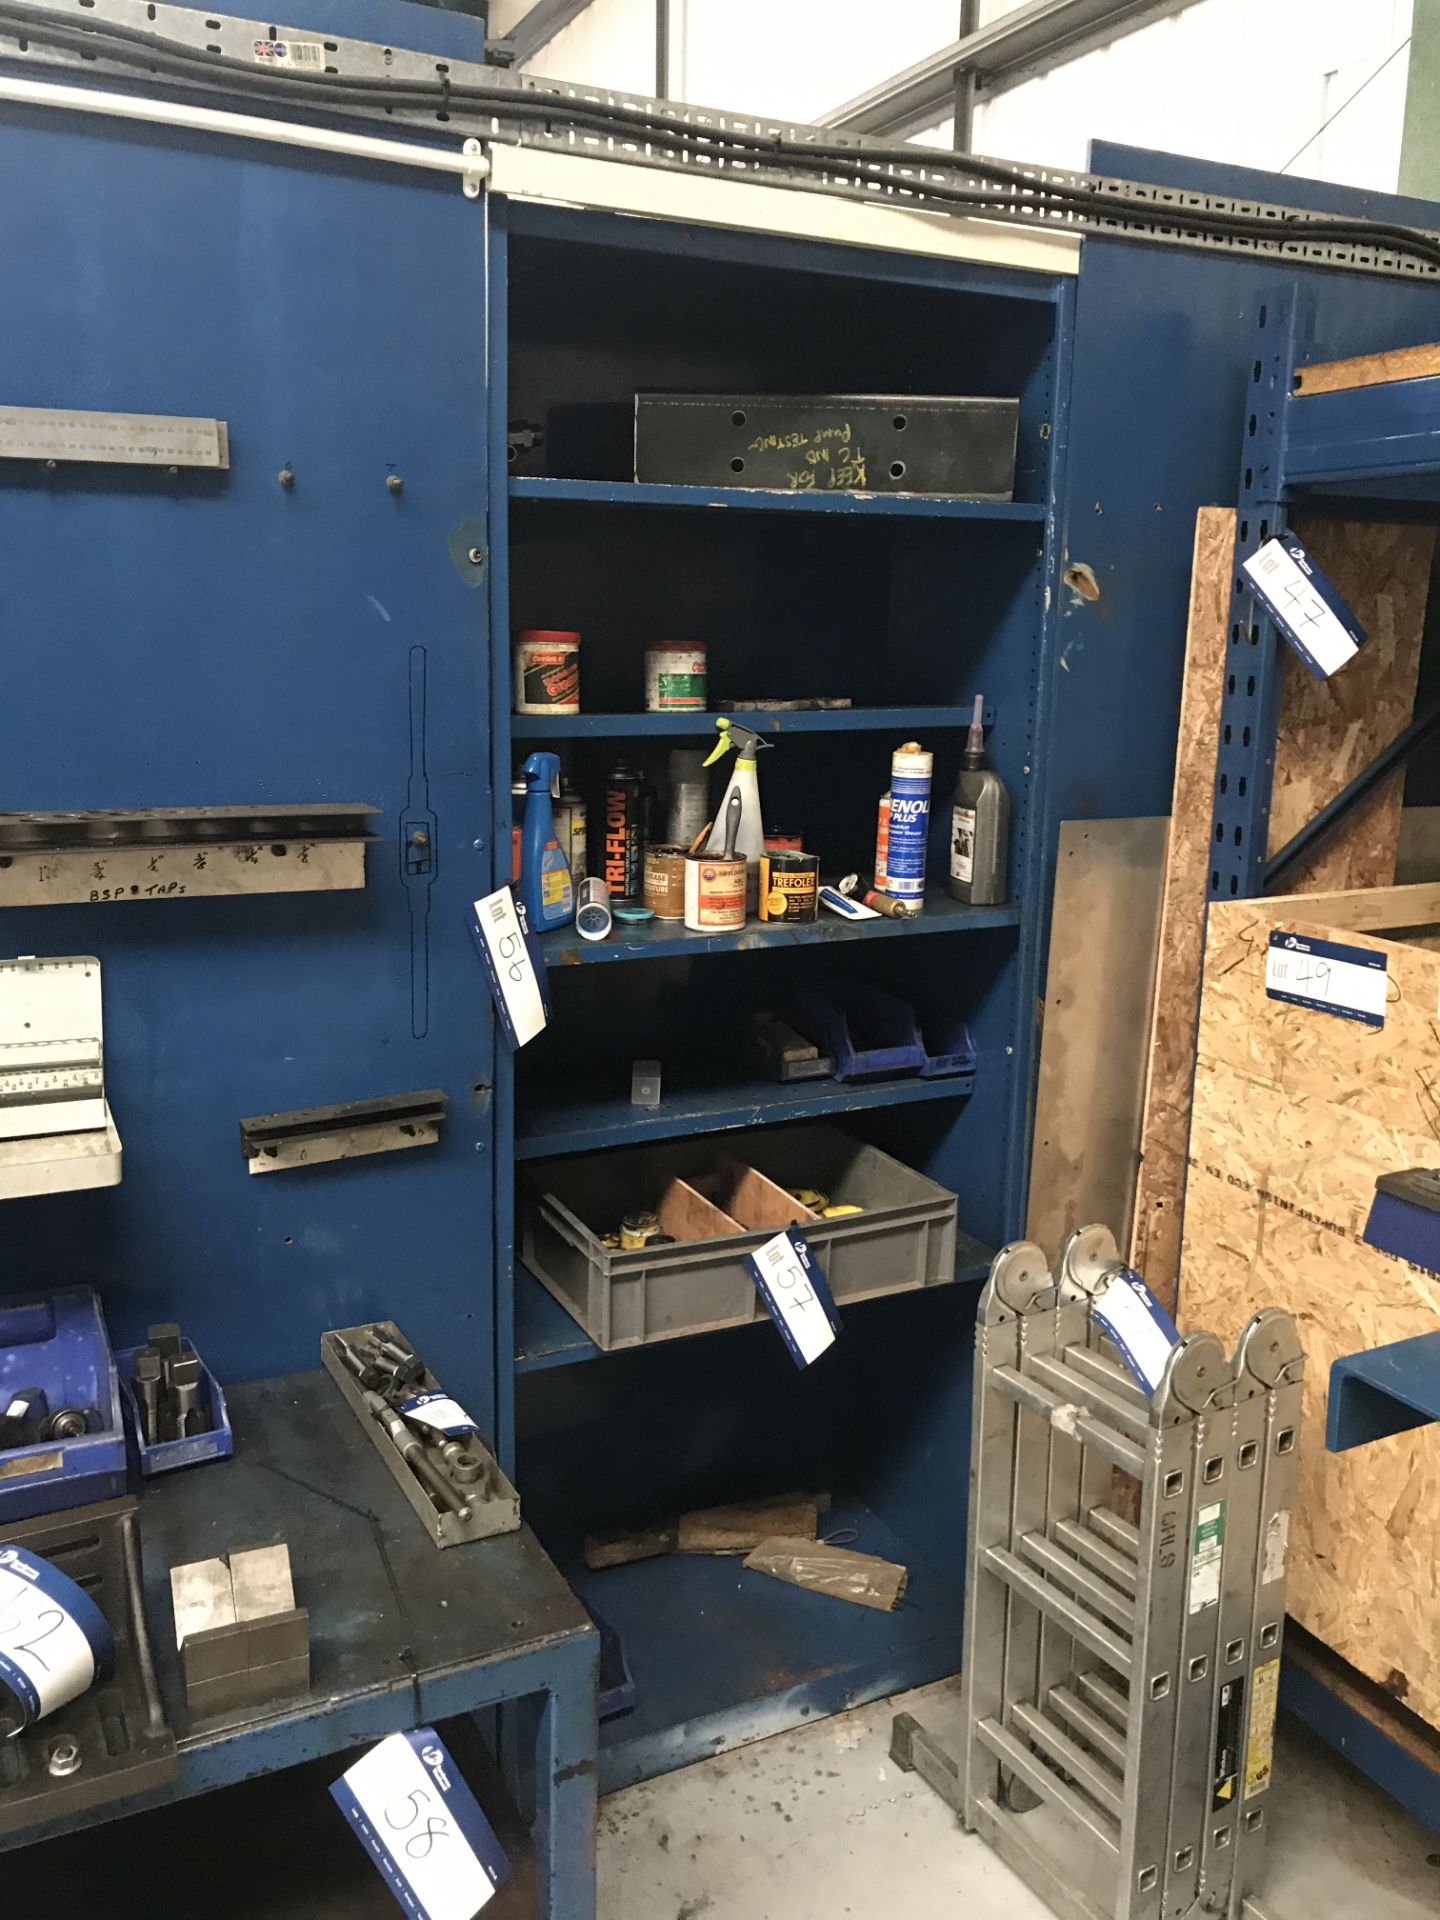 Five Tier Metal Shelving Unit including contents of Cutting Fluid and Grease